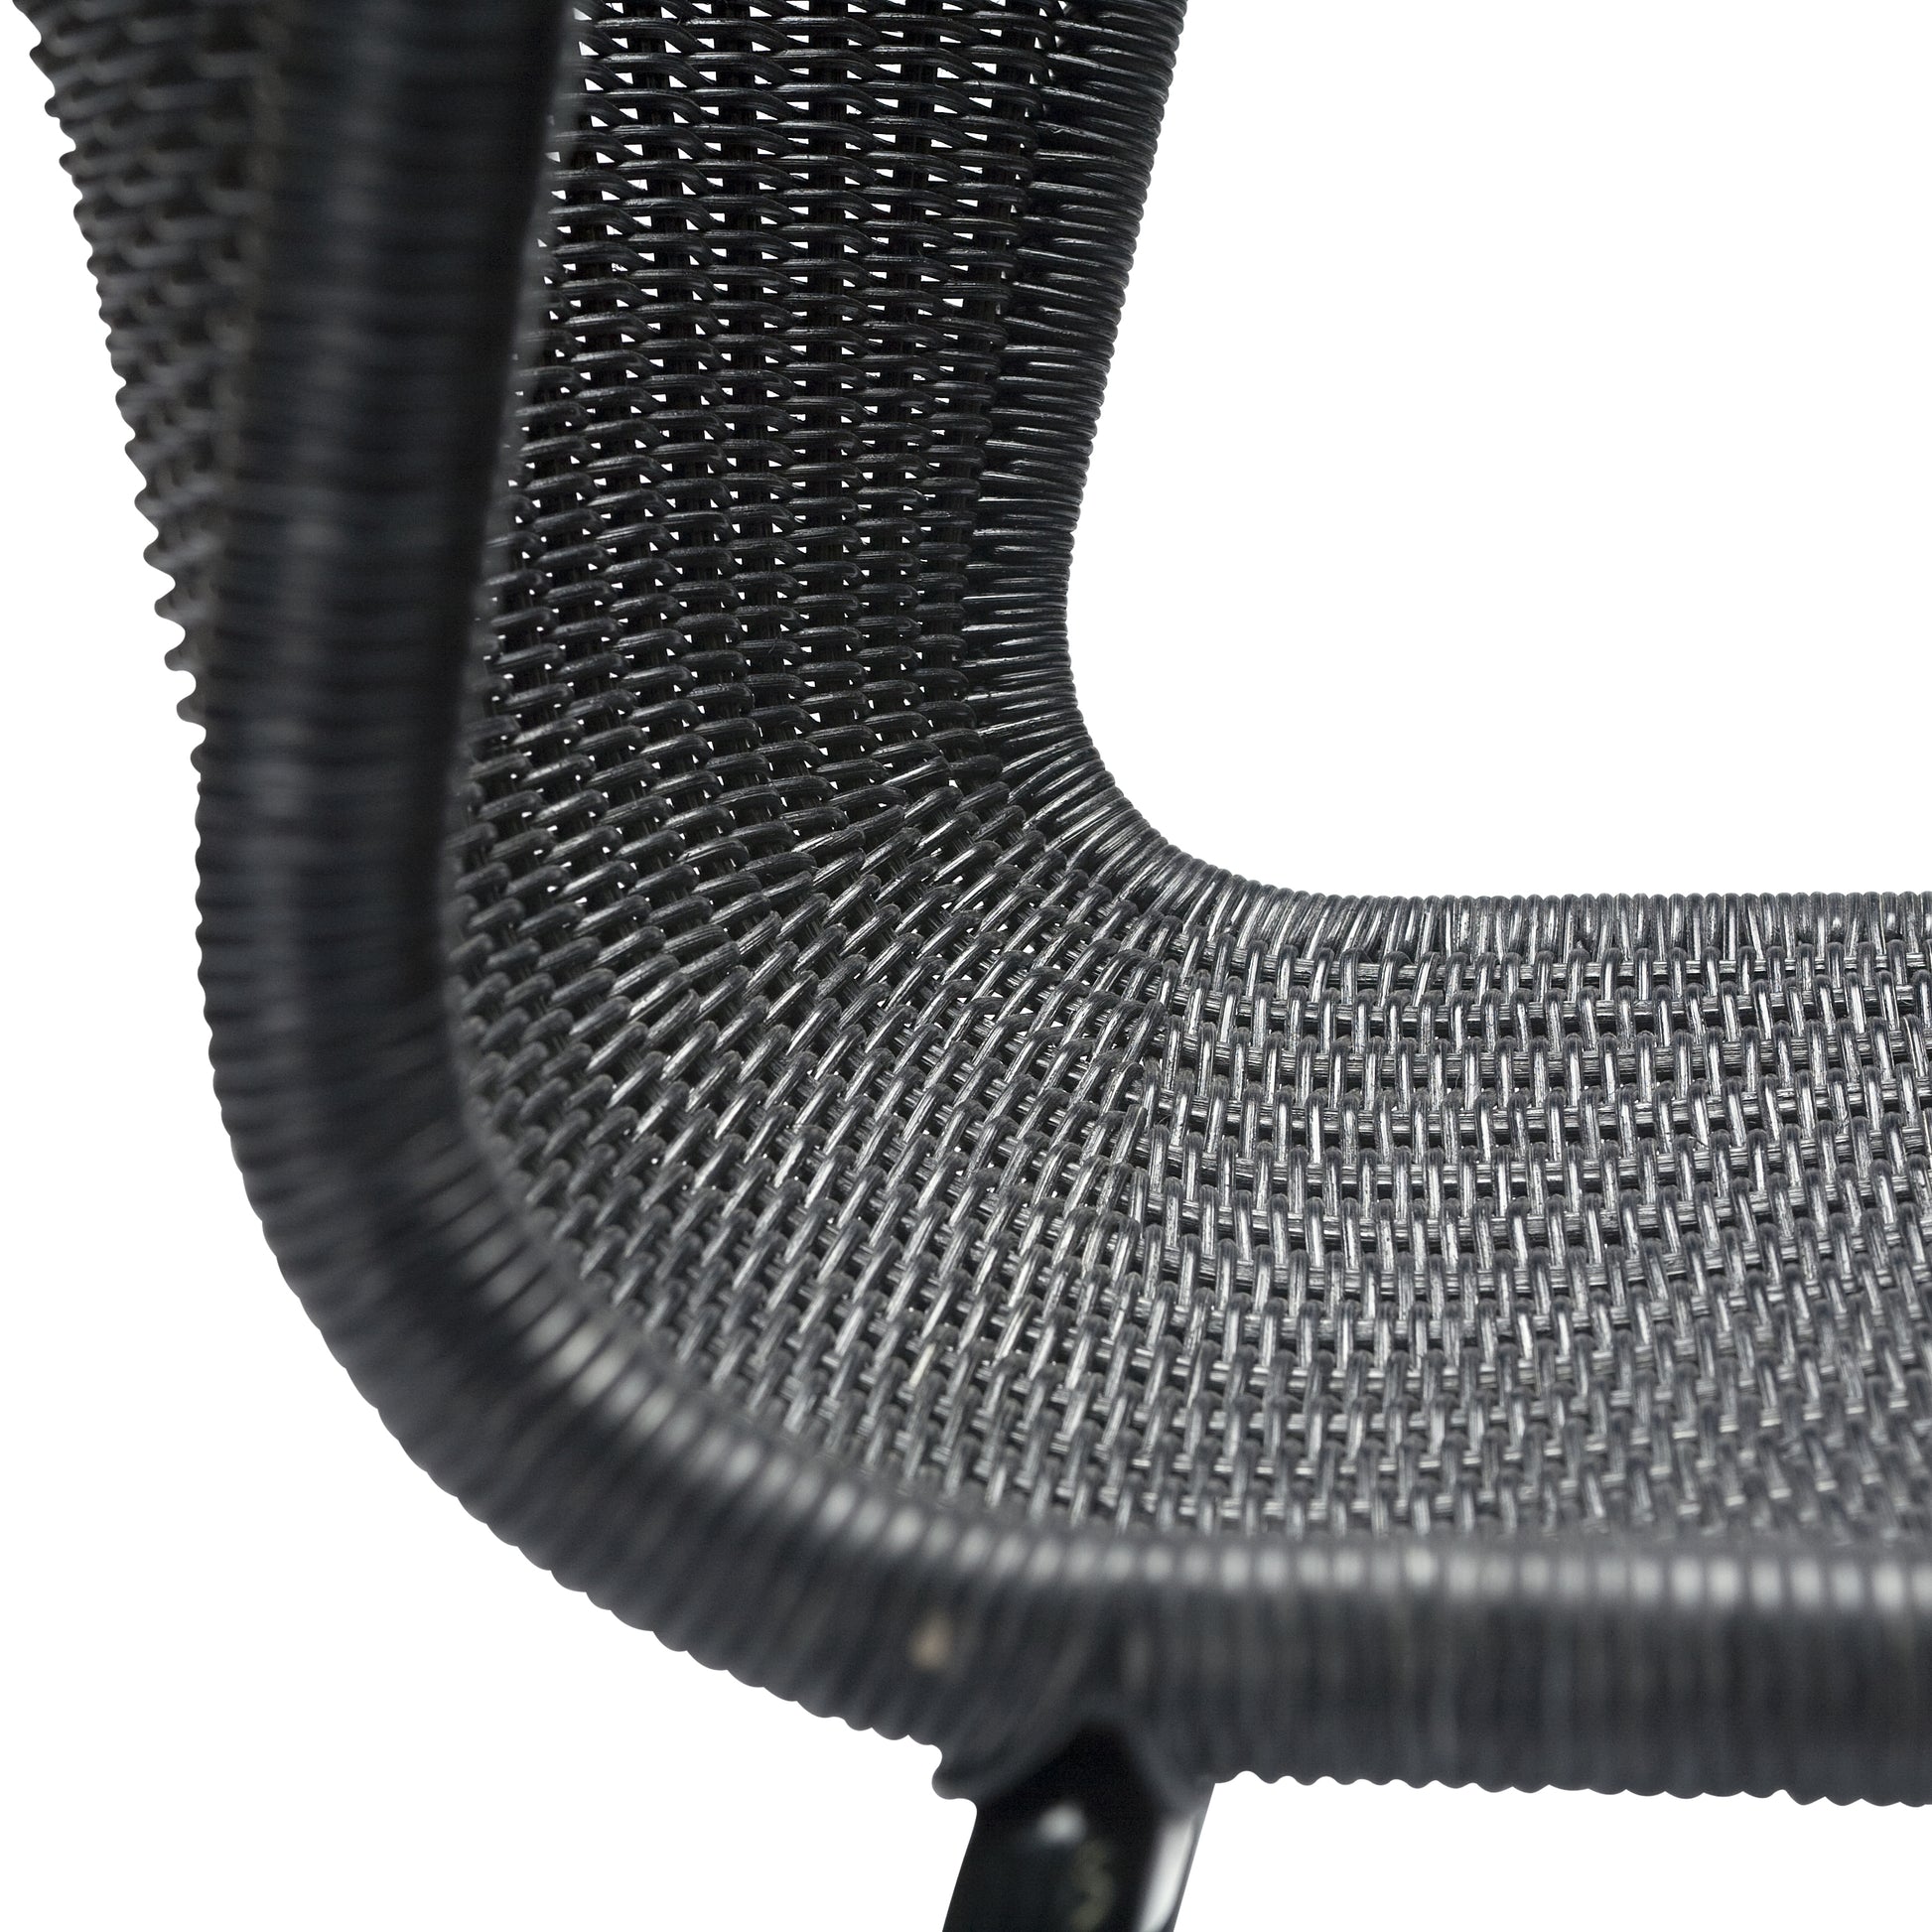 woven black dining chair with black legs